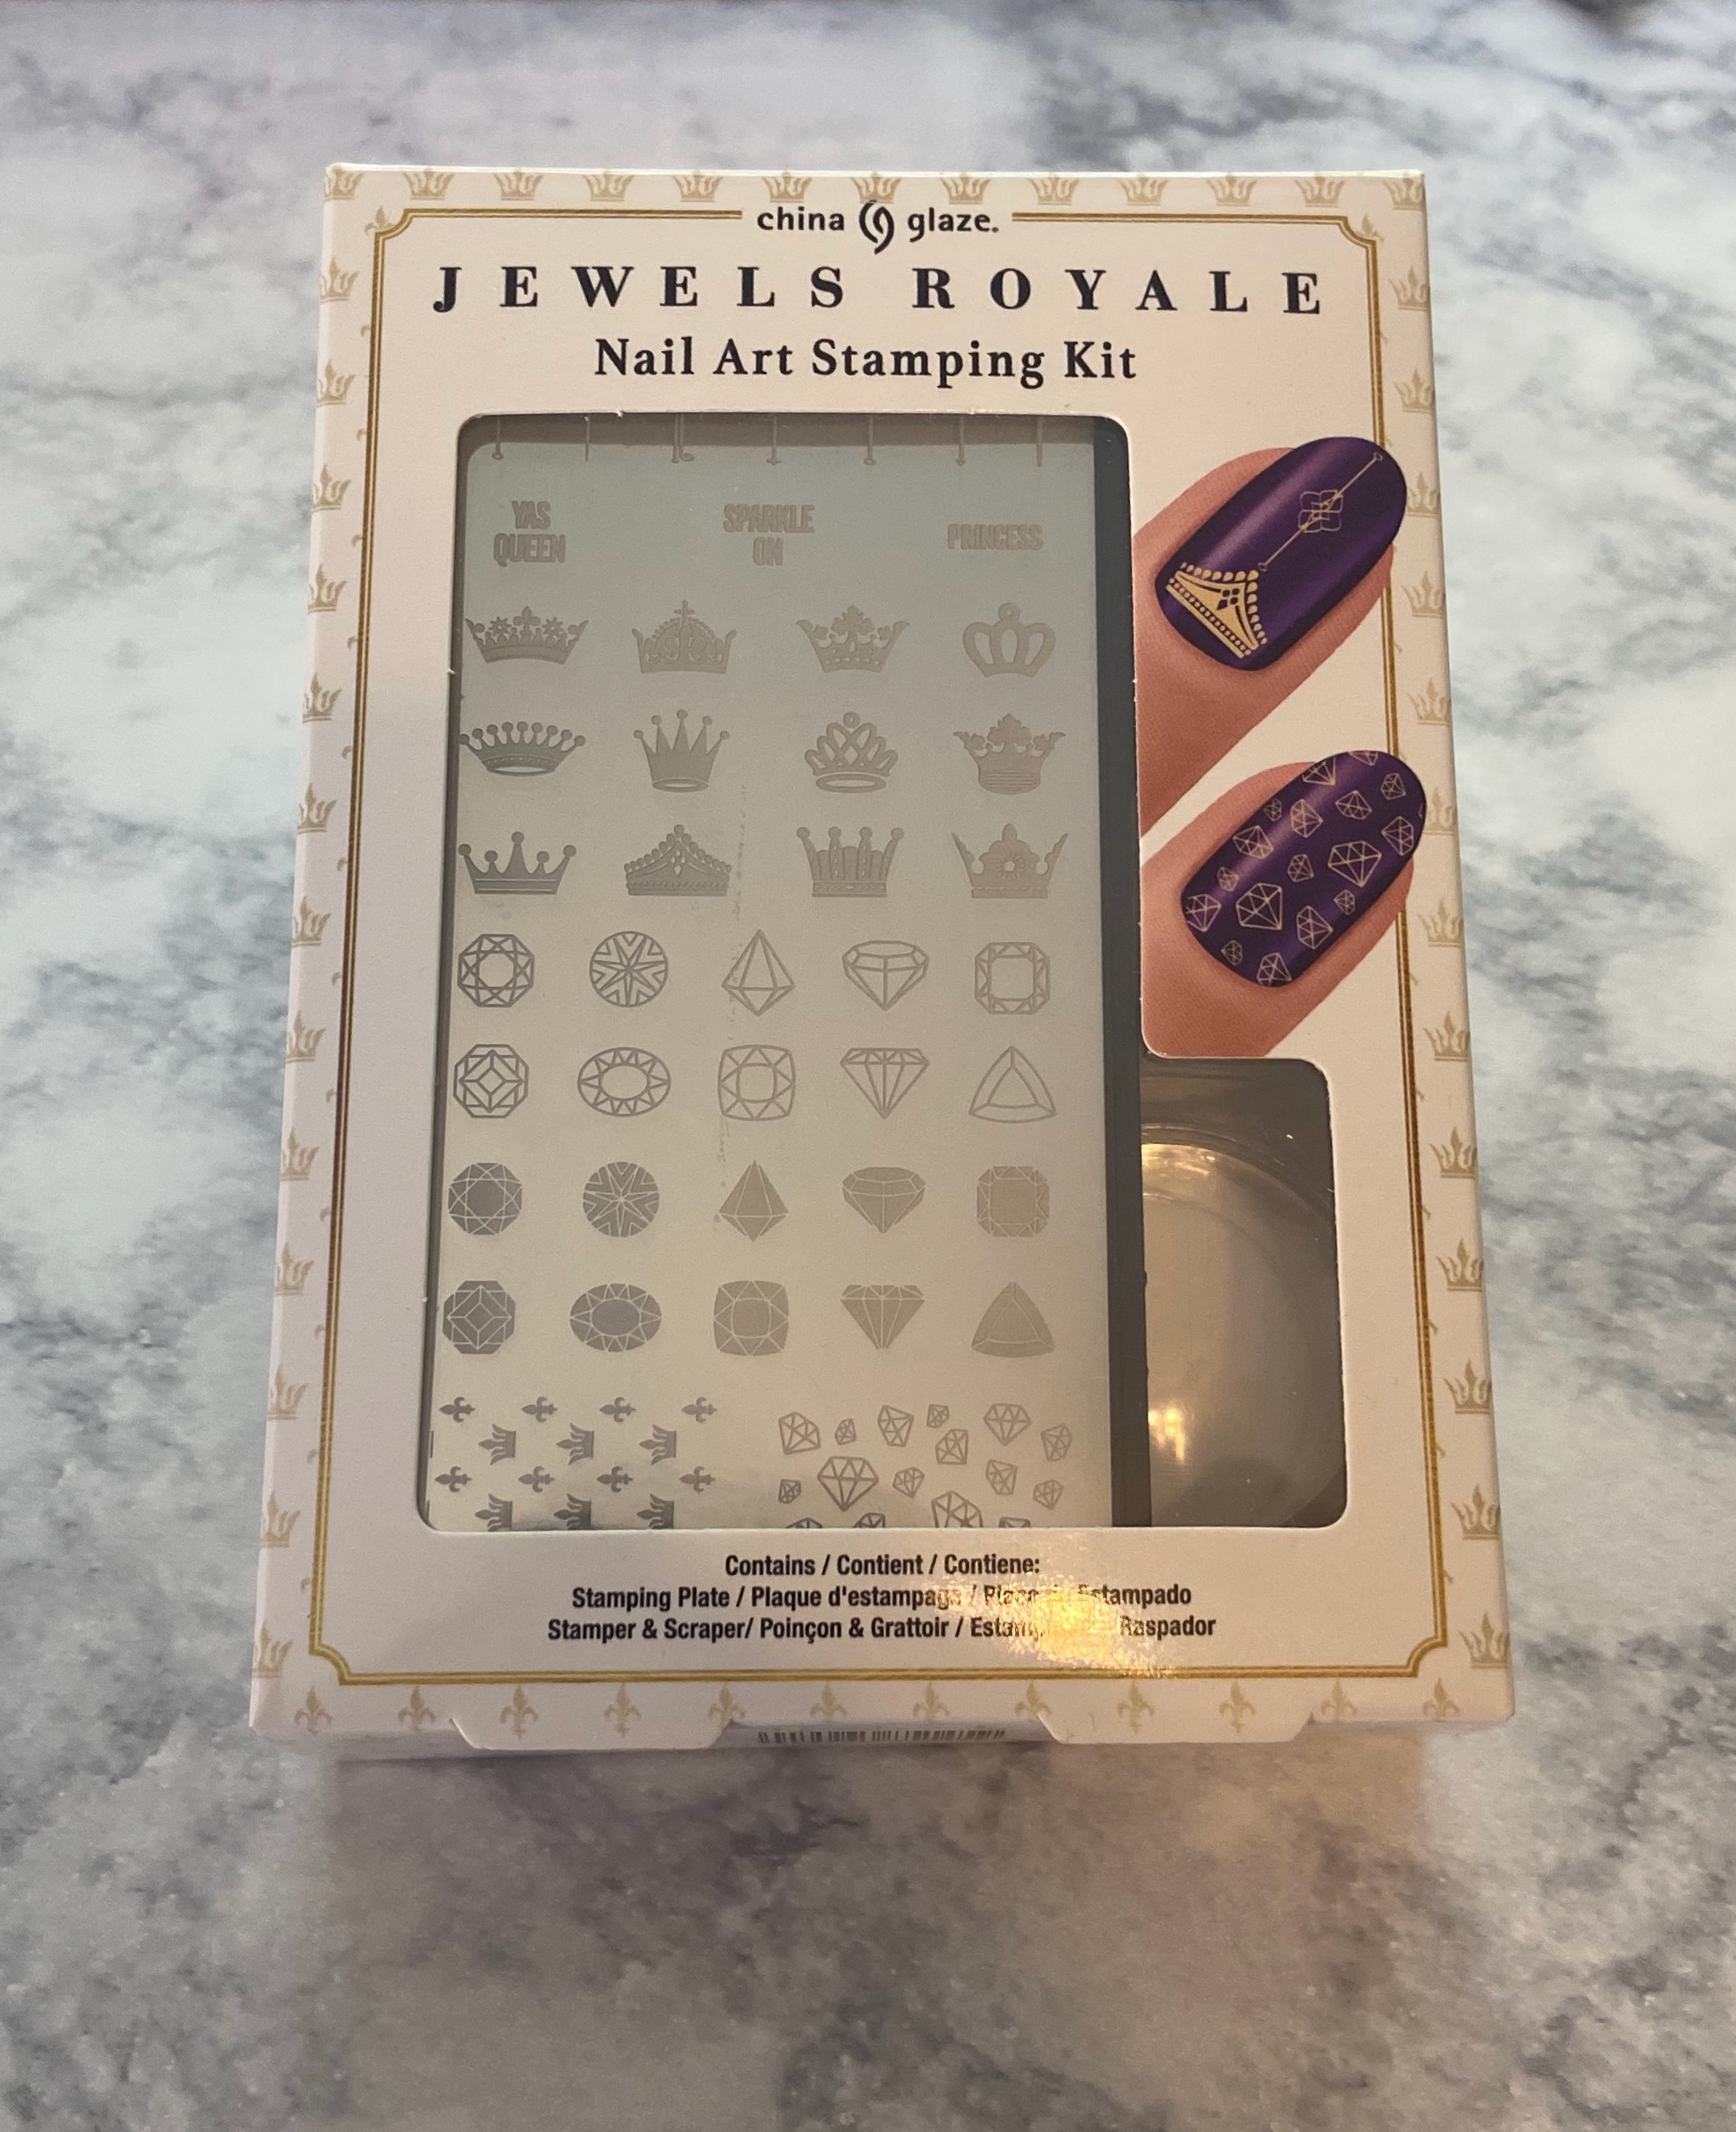 Jewels Royale Nail Stamping Kit Review